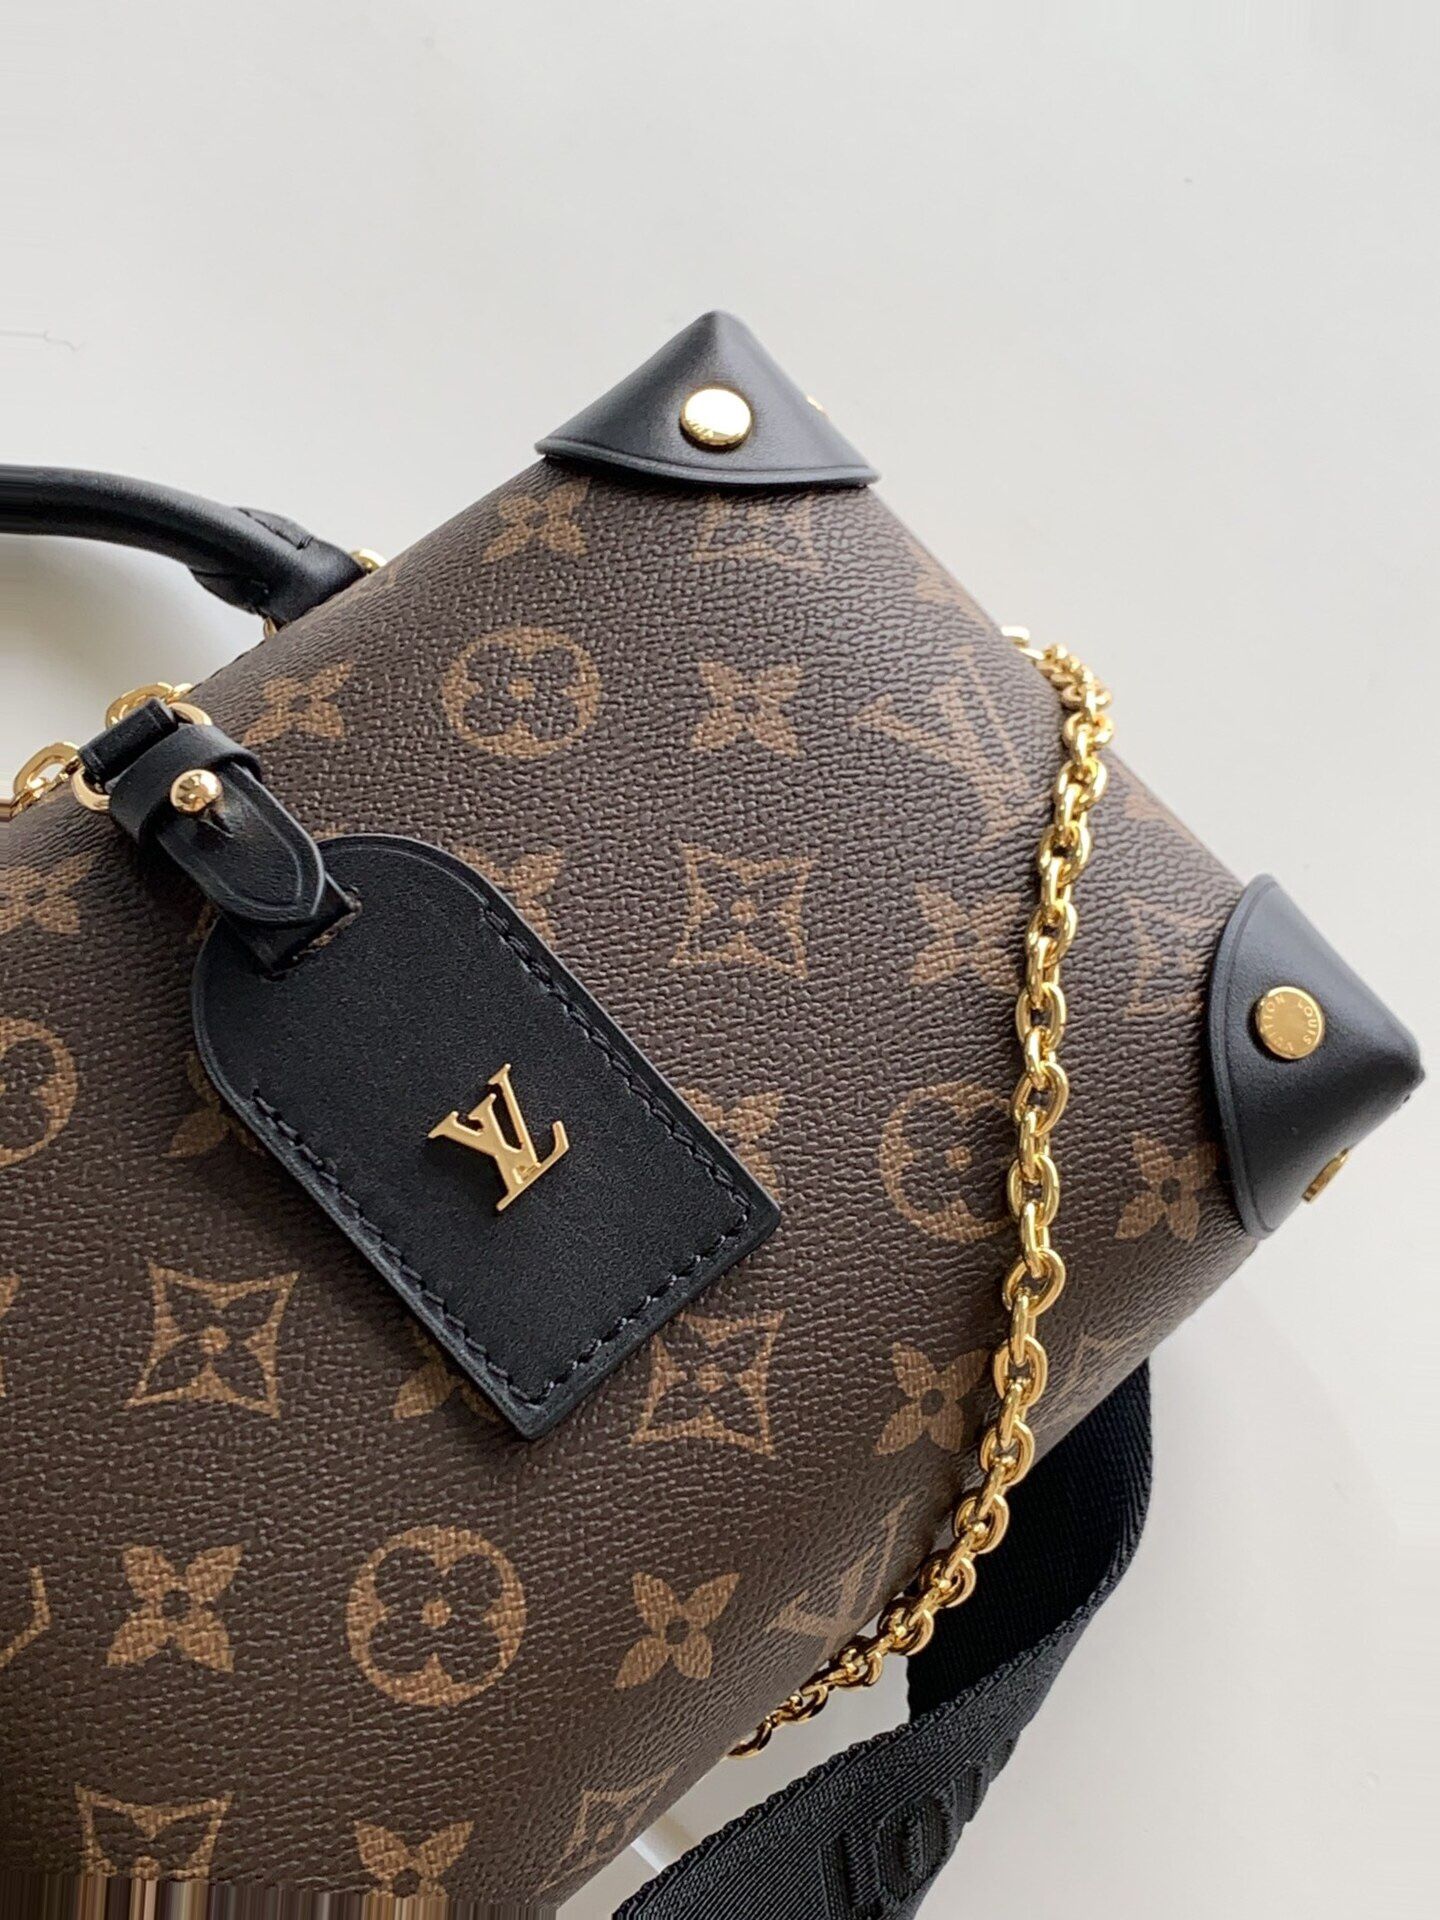 Louis Vuitton Petite Malle Bags for Sale in Los Angeles, CA - OfferUp